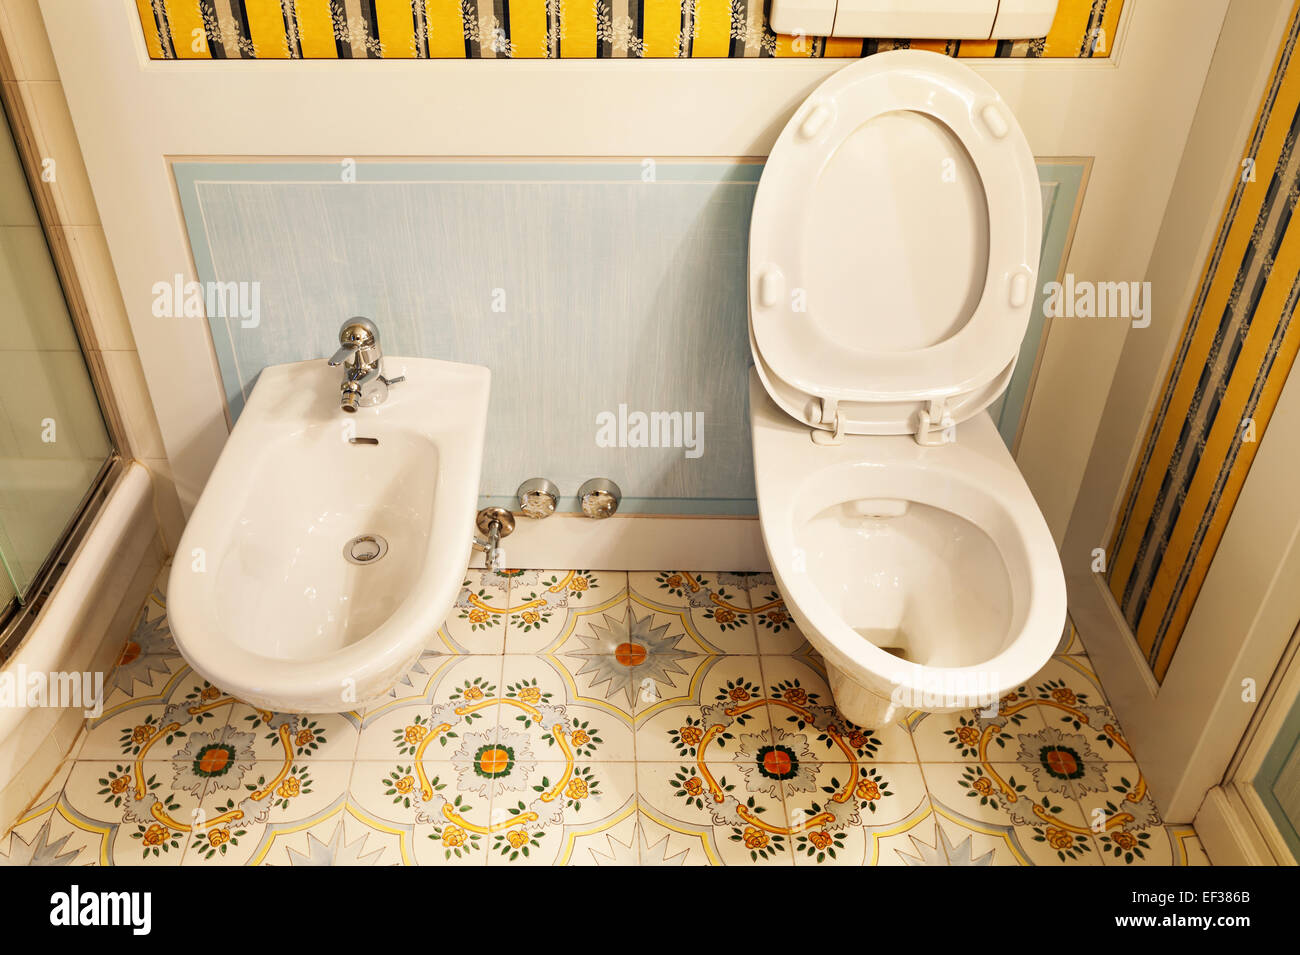 comfortable bathroom in style classic, wc and bidet Stock Photo